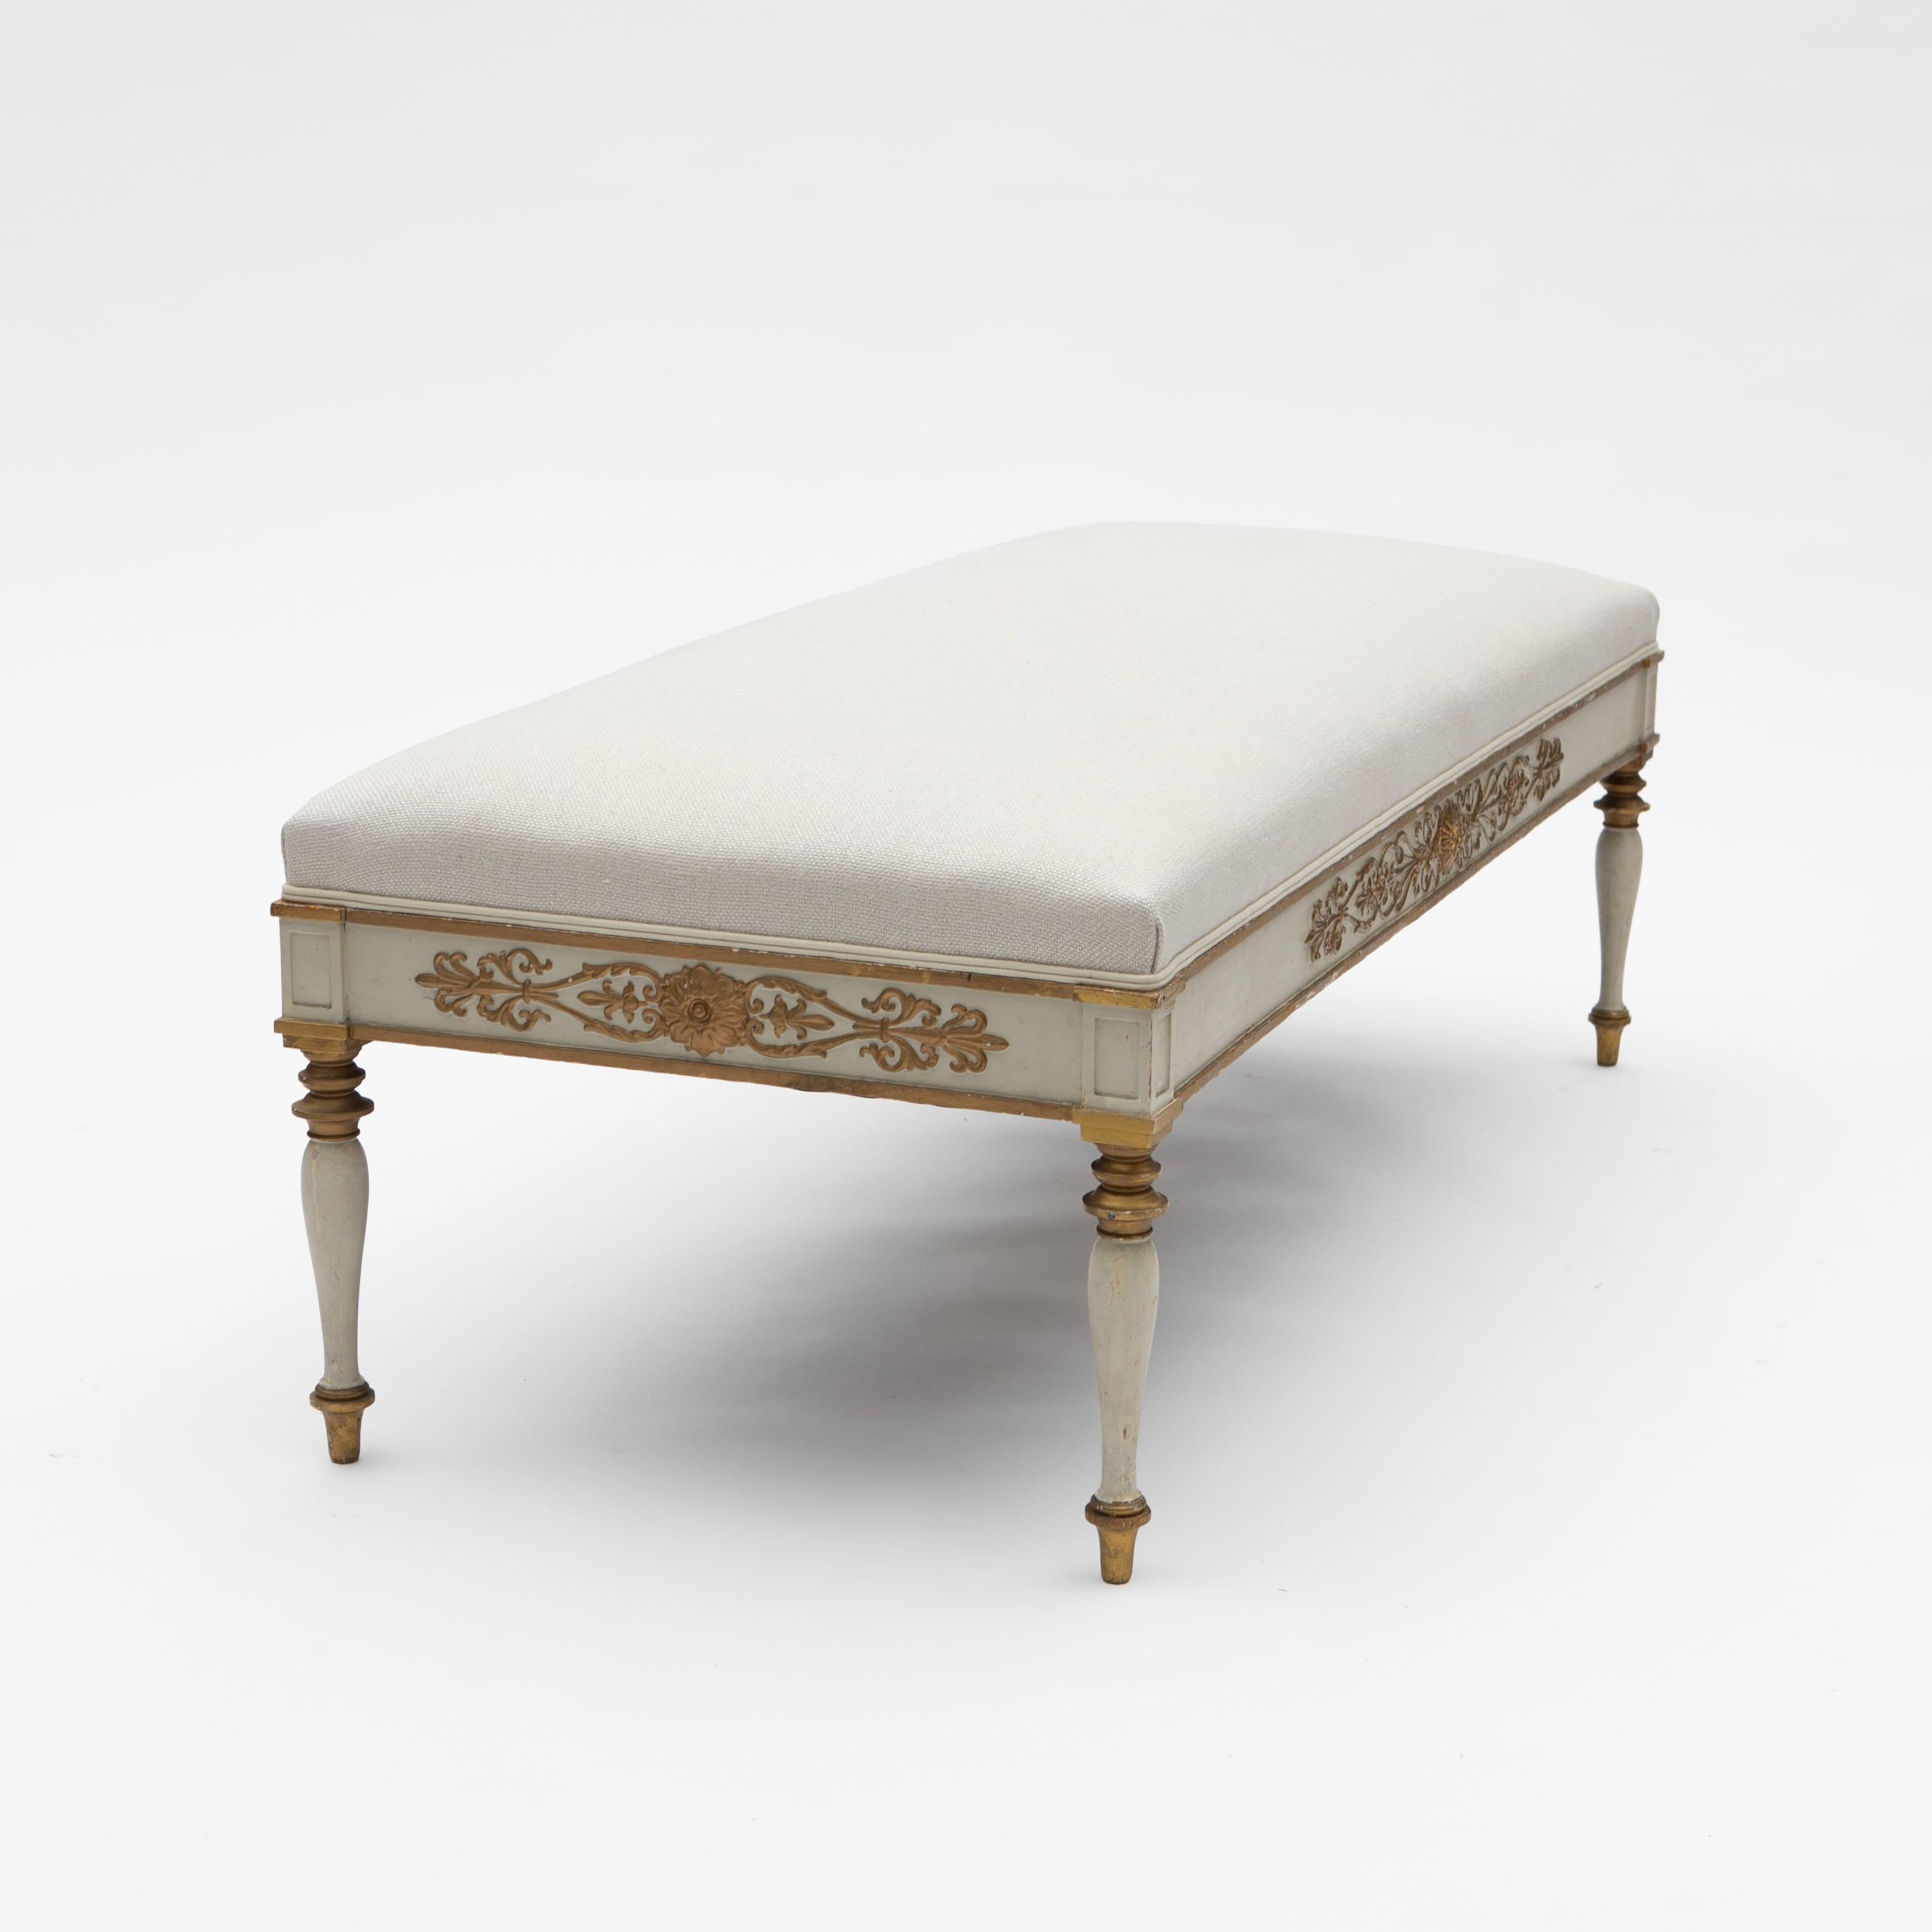 Late Empire Upholstered Bench with Carved Gilt Carvings In Good Condition For Sale In Kastrup, DK